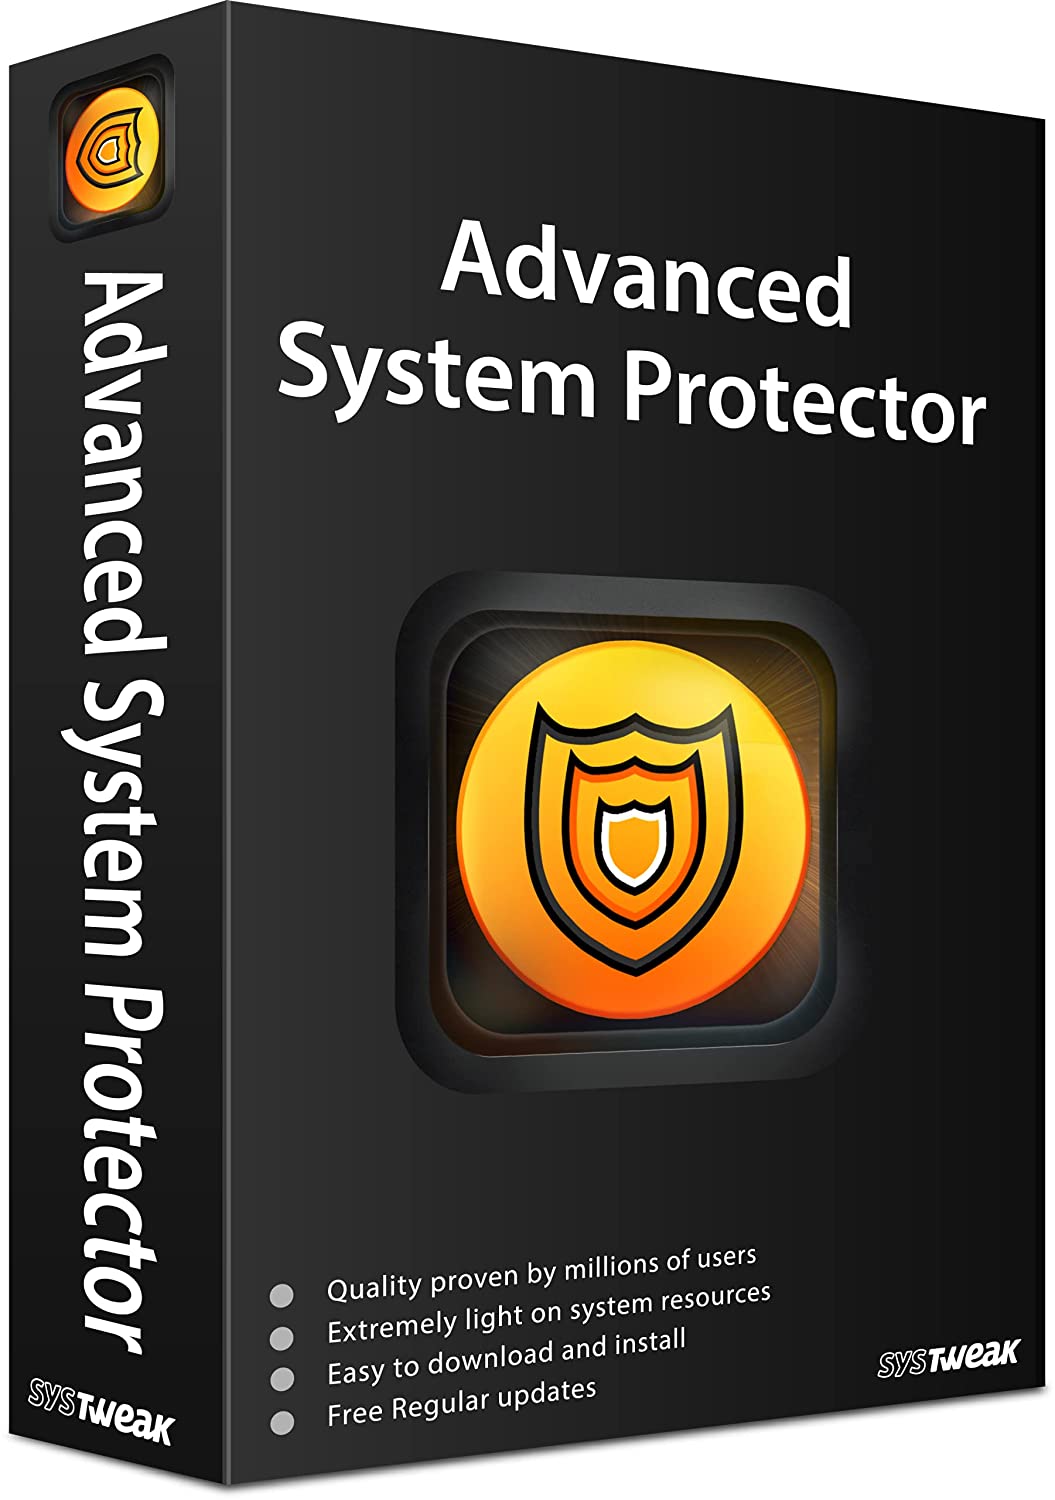 Download Advanced System Protector Full Version